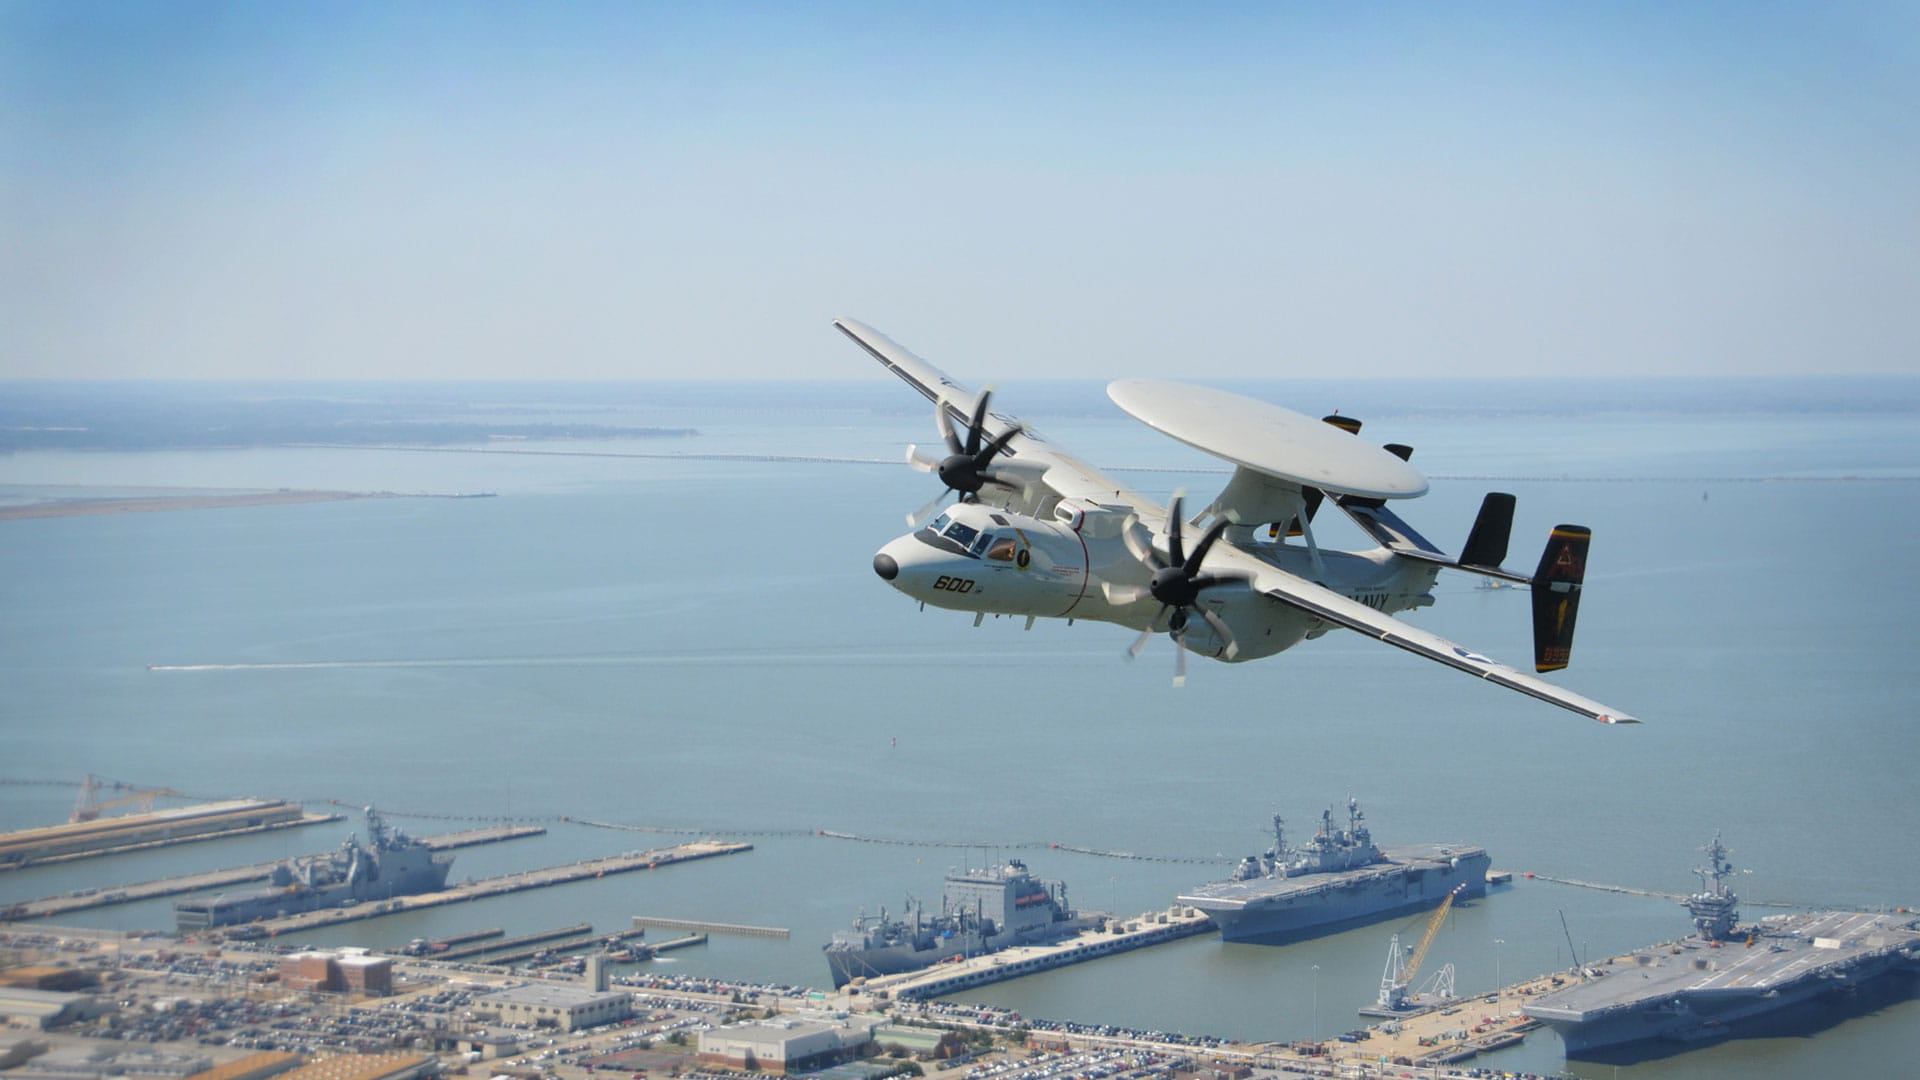 An E-2D in the air with Naval vessels visible in the background